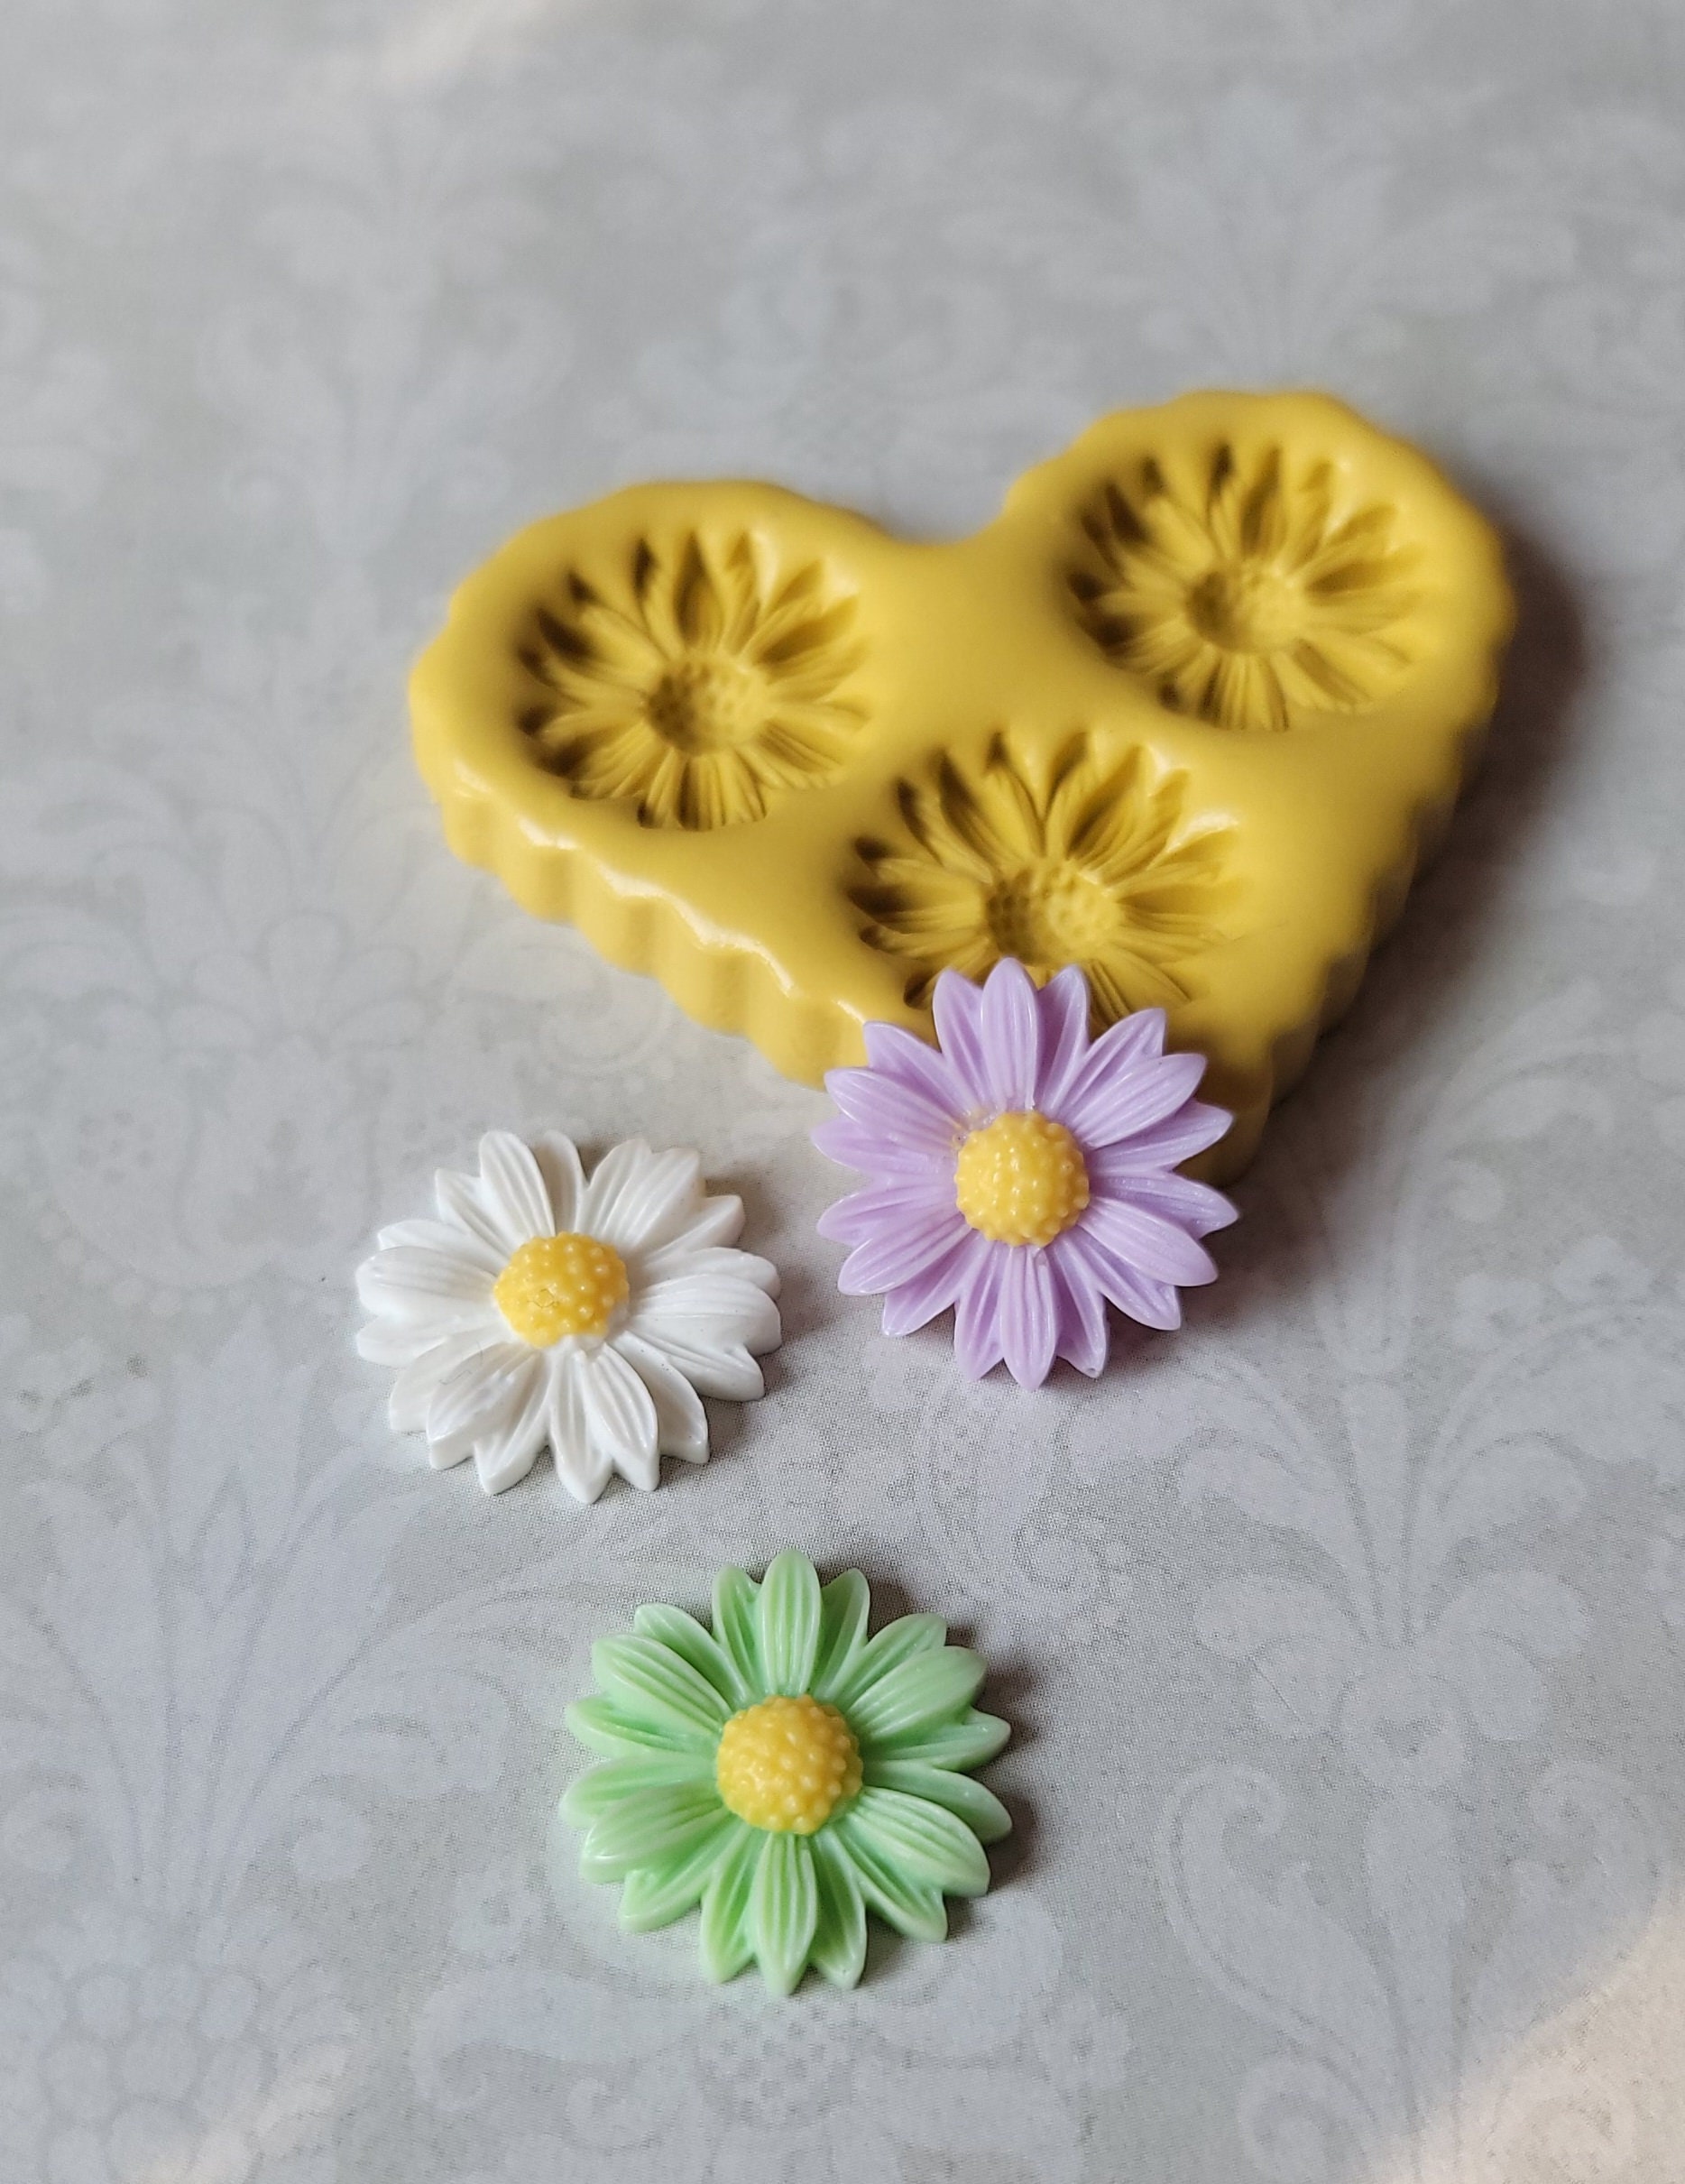 Daisy Silicone Molds of 6 Cavities for Jelly Pudding Chocolate